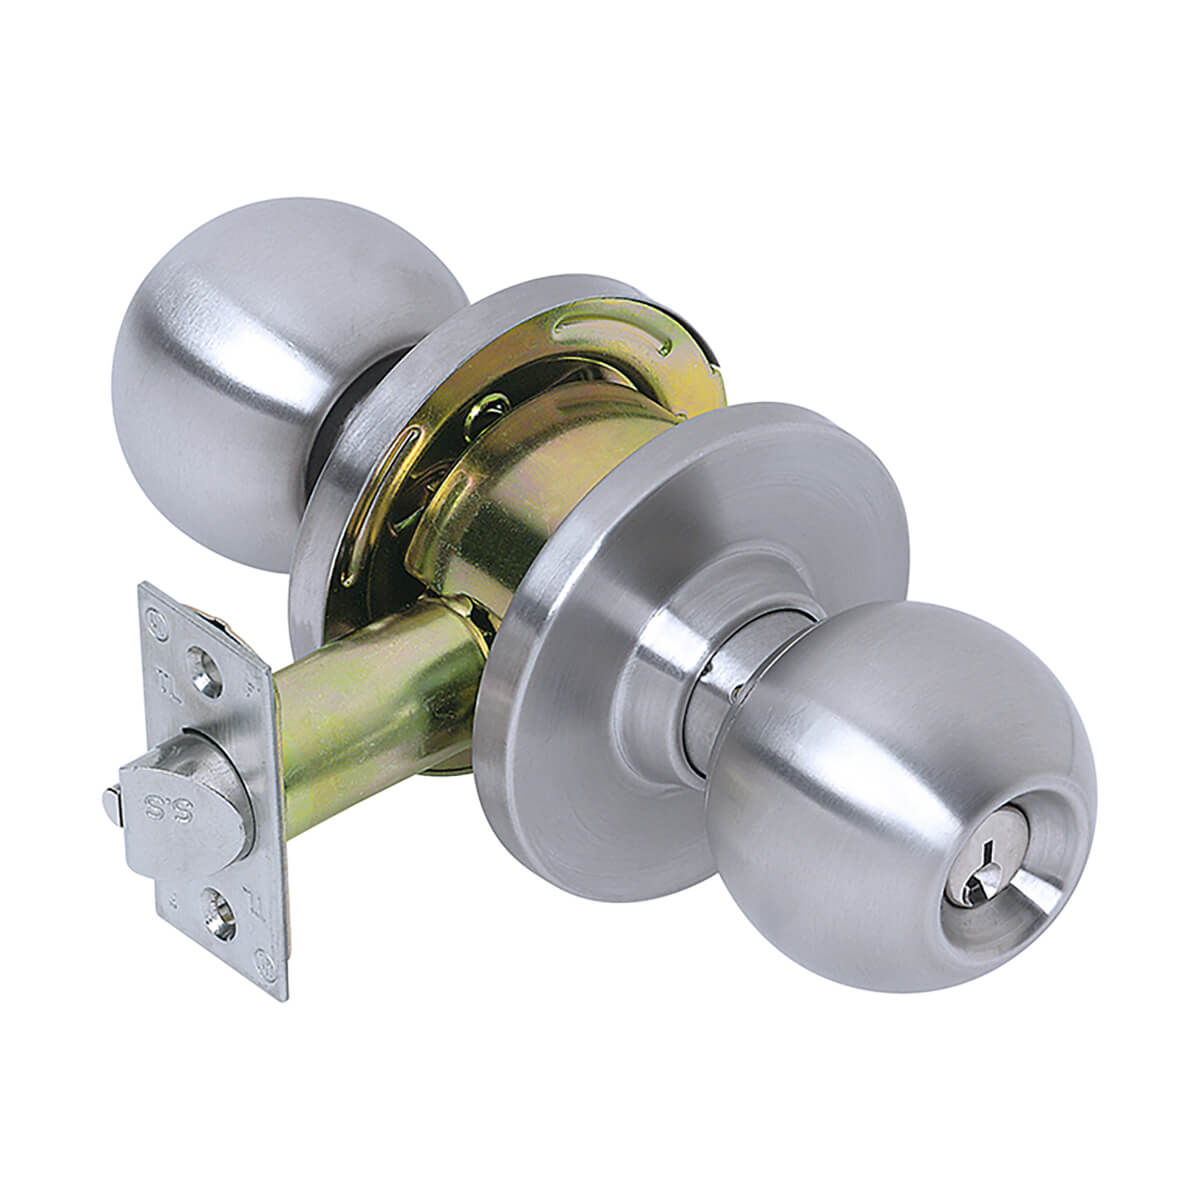 Tell Manufacturing CL100053 Stainless Steel Light-Duty Co mmercial Entry Knob